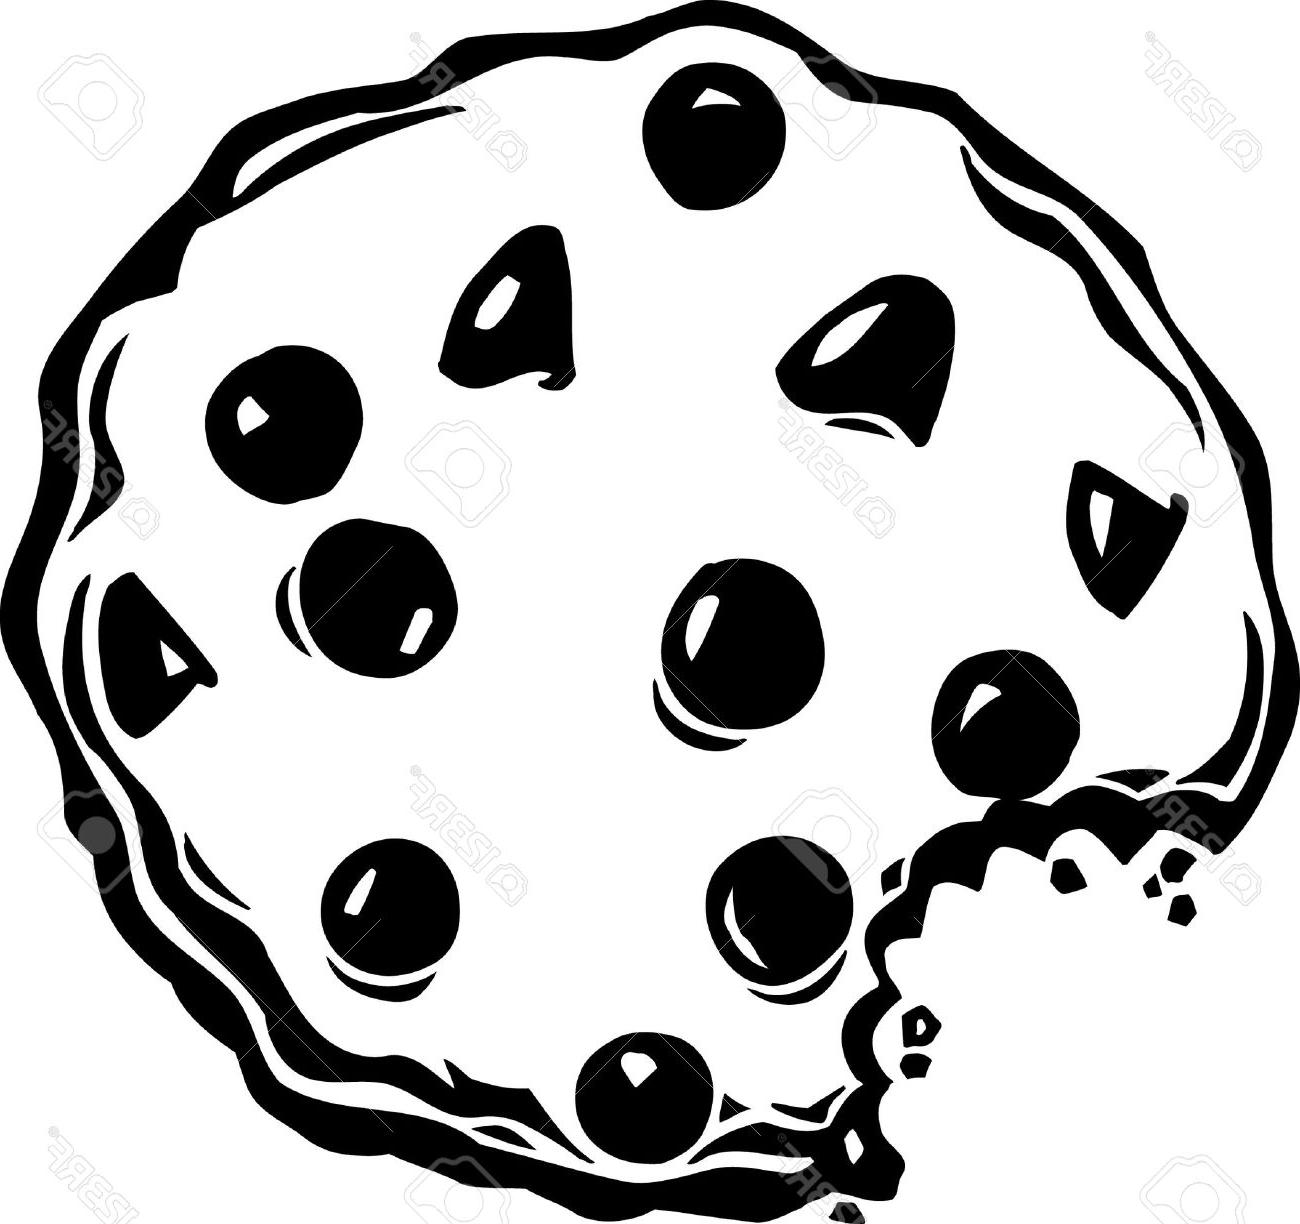 Cookie clipart black and white, Cookie black and white Transparent FREE